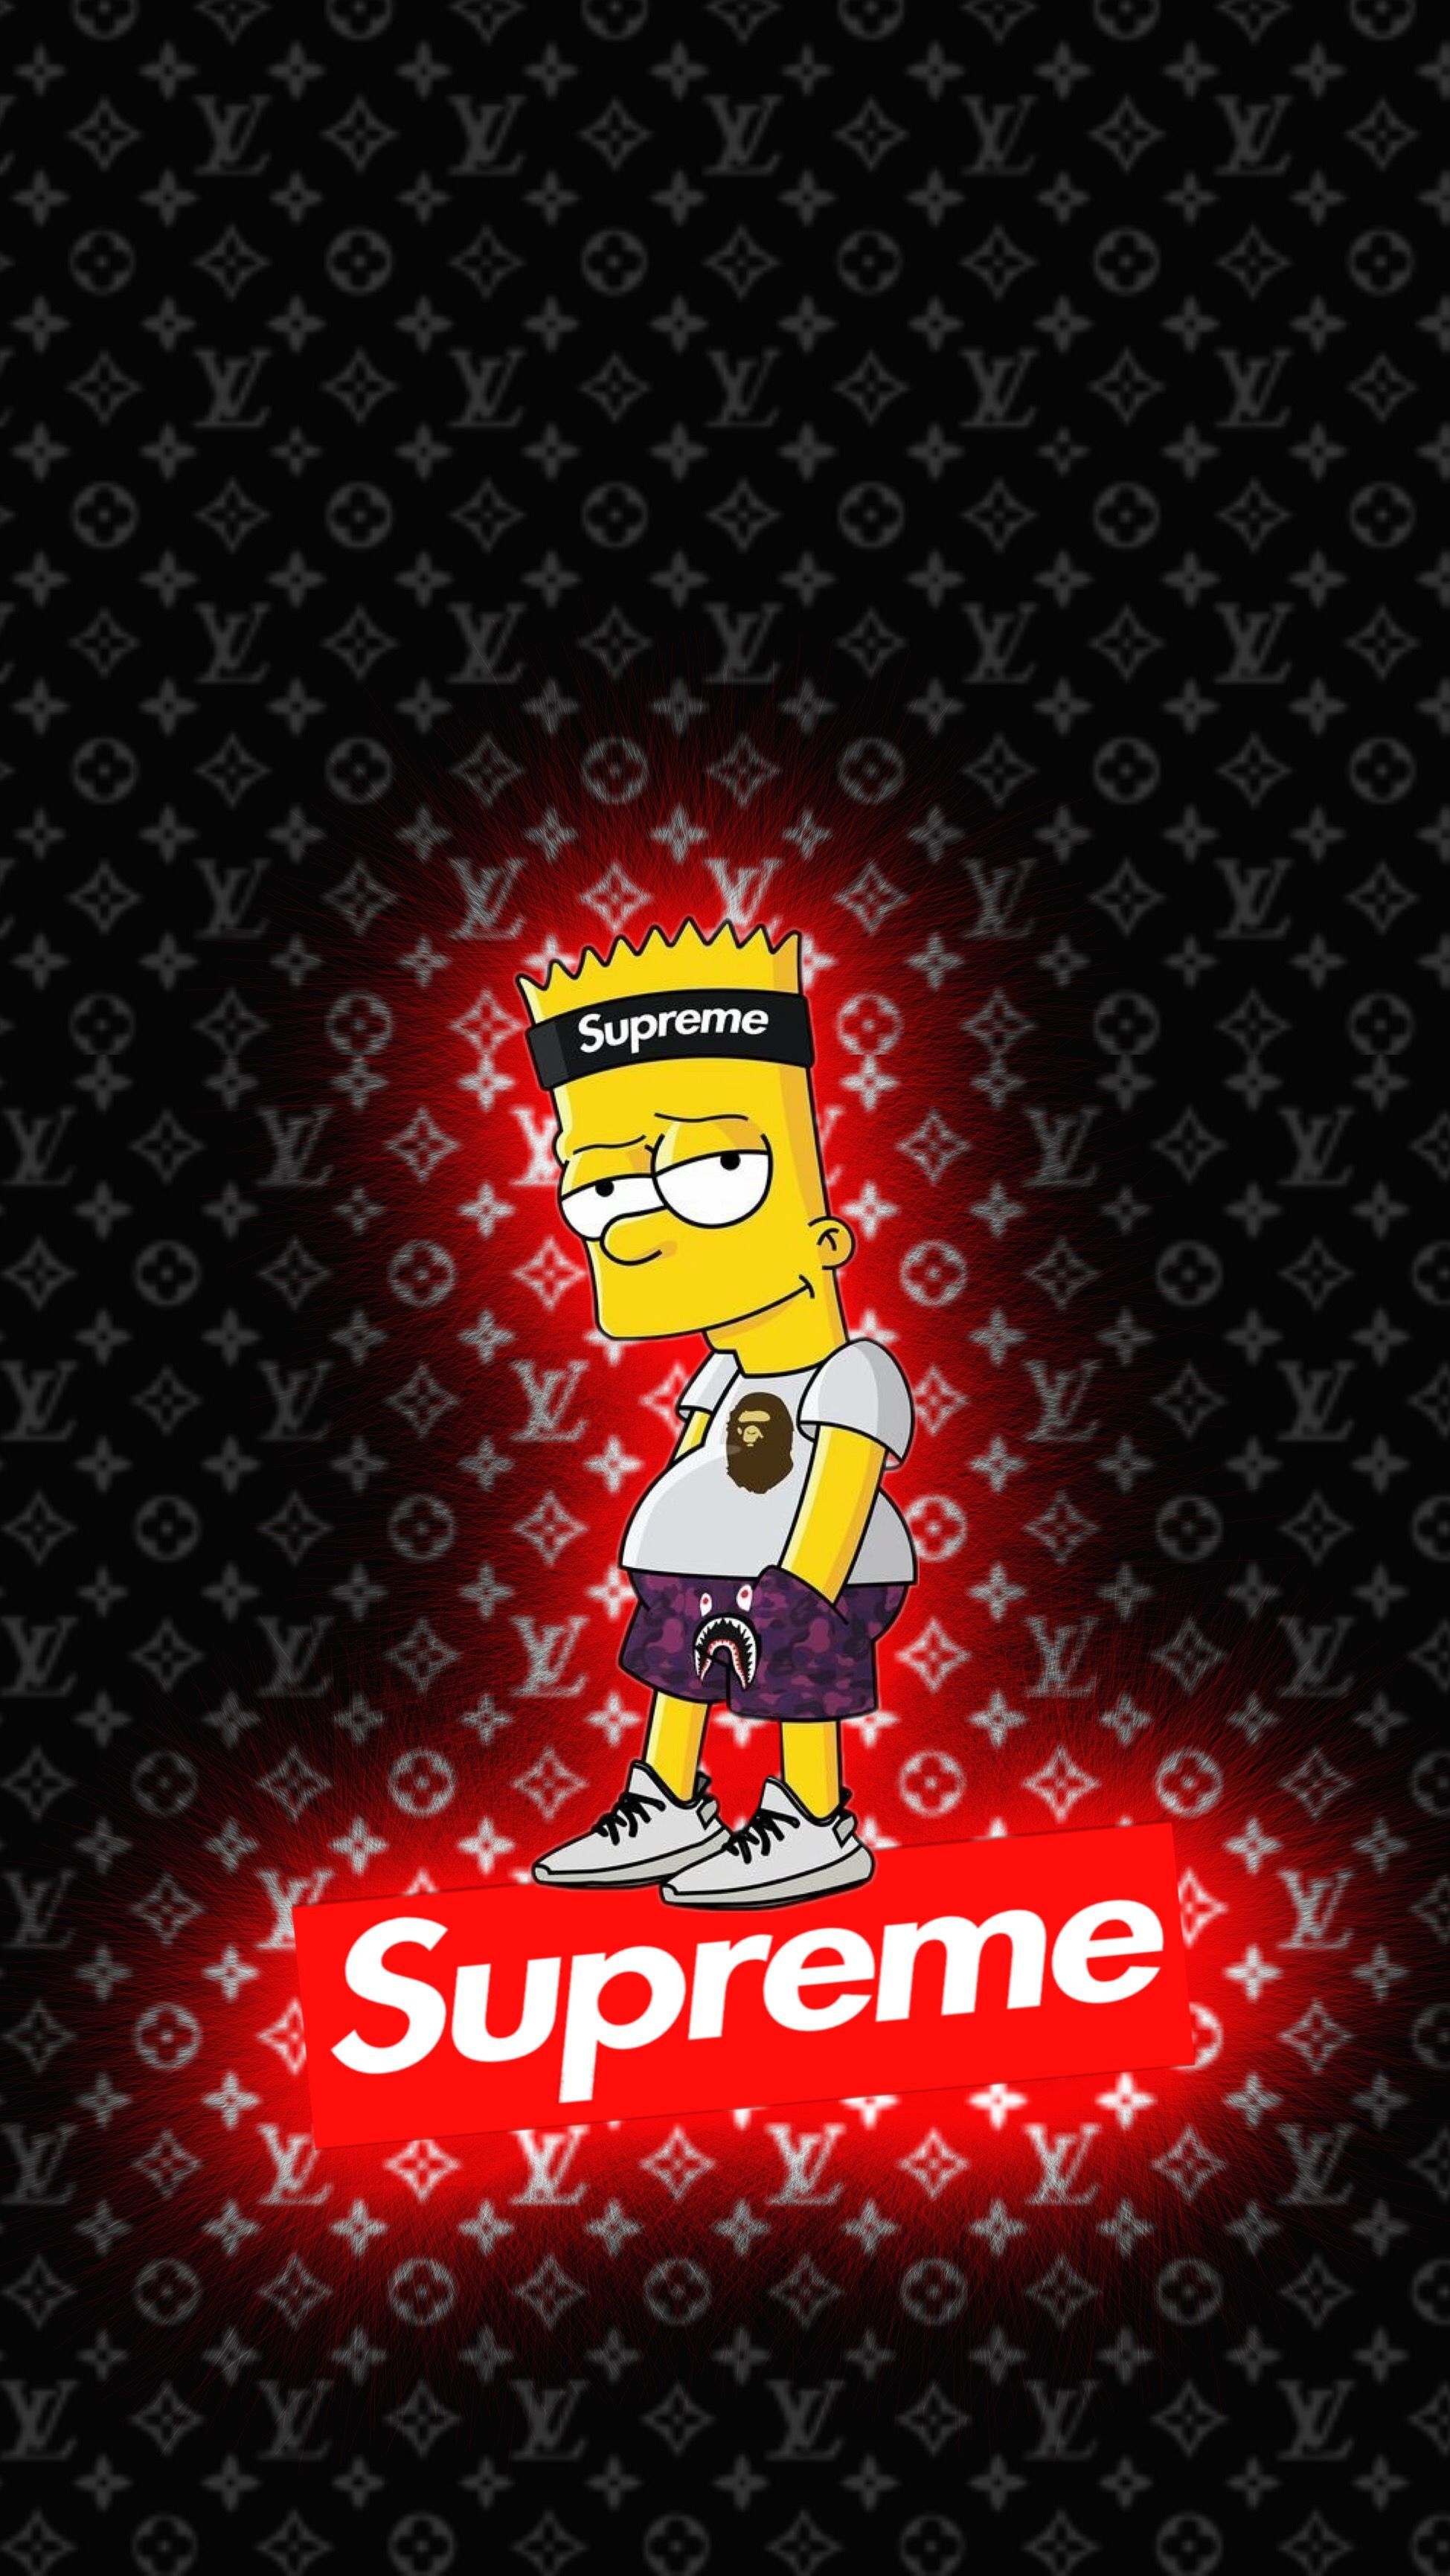 Bart Simpson Supreme wallpaper by<ref> the simpsons</ref><box>(349,350),(641,748)</box> - Bart Simpson, Supreme